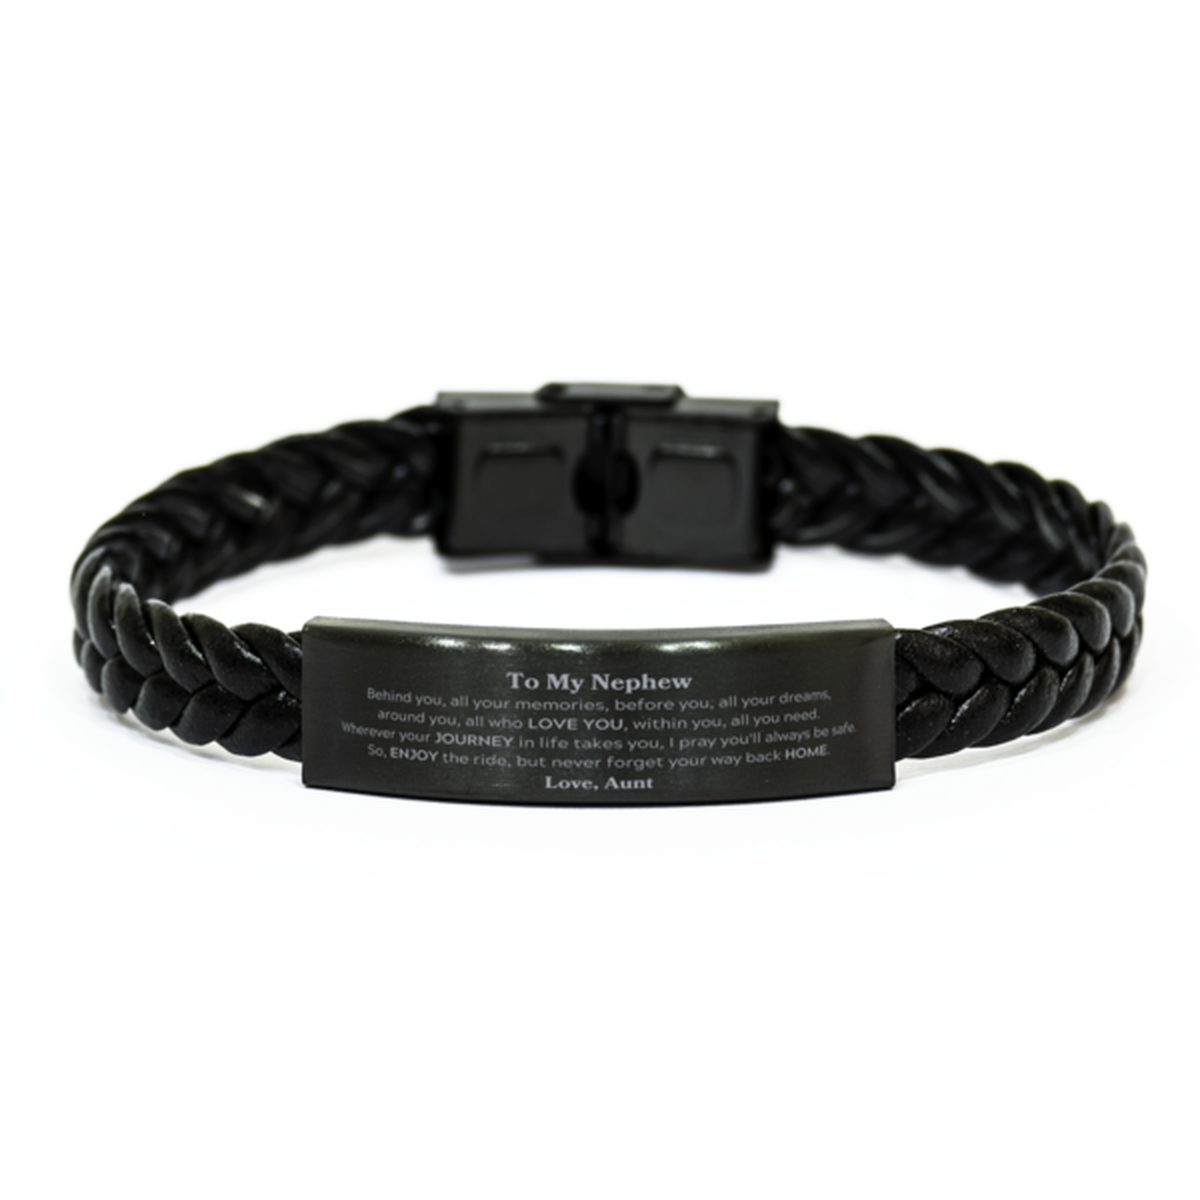 To My Nephew Graduation Gifts from Aunt, Nephew Braided Leather Bracelet Christmas Birthday Gifts for Nephew Behind you, all your memories, before you, all your dreams. Love, Aunt